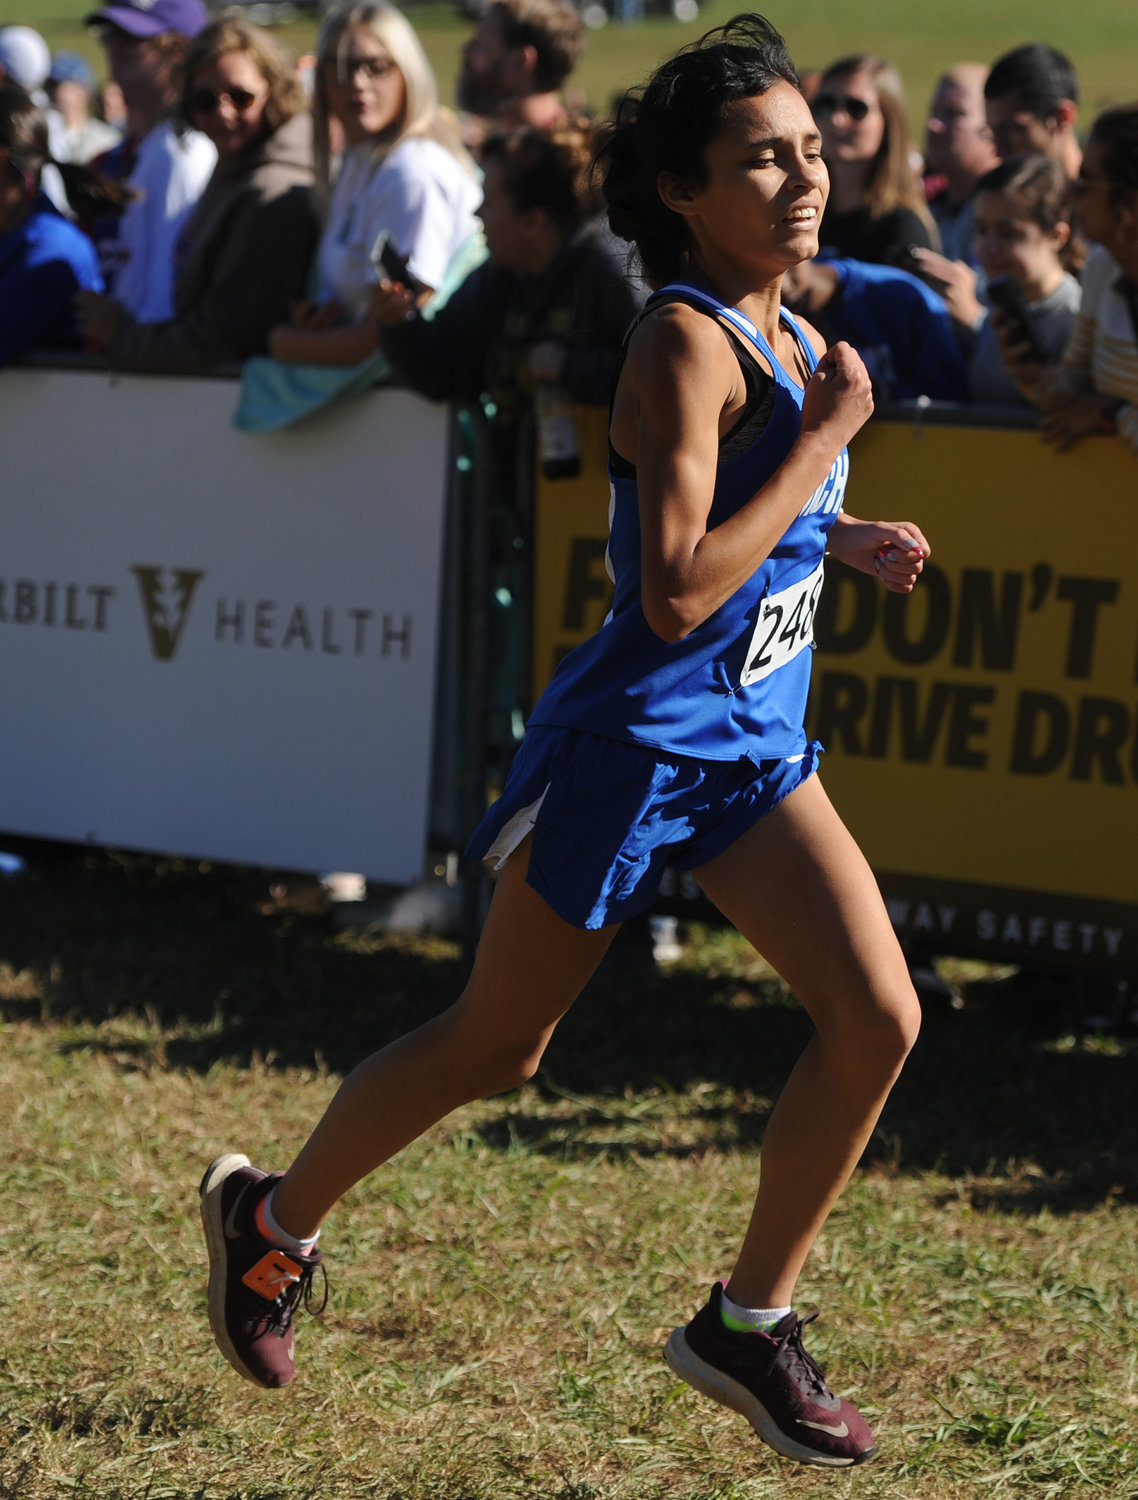 Molina was the top runner for the Tigerette cross country team that qualified for the Class A-AA state meet in 2021.